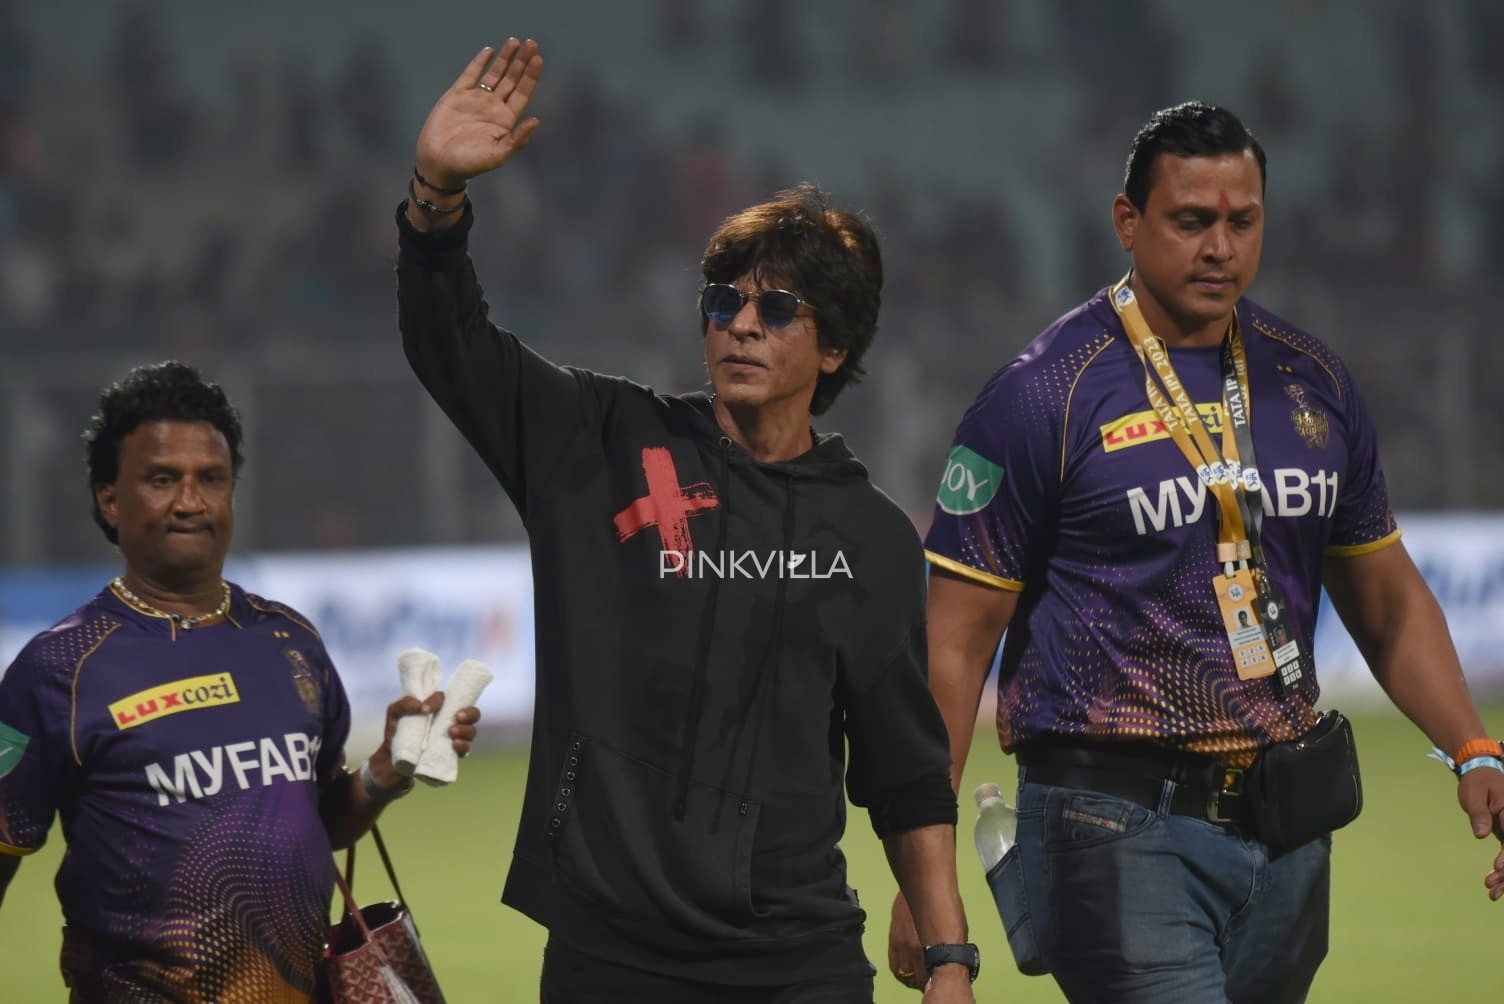 Shah Rukh Khan greets fans after the match (Credits: APH Images)